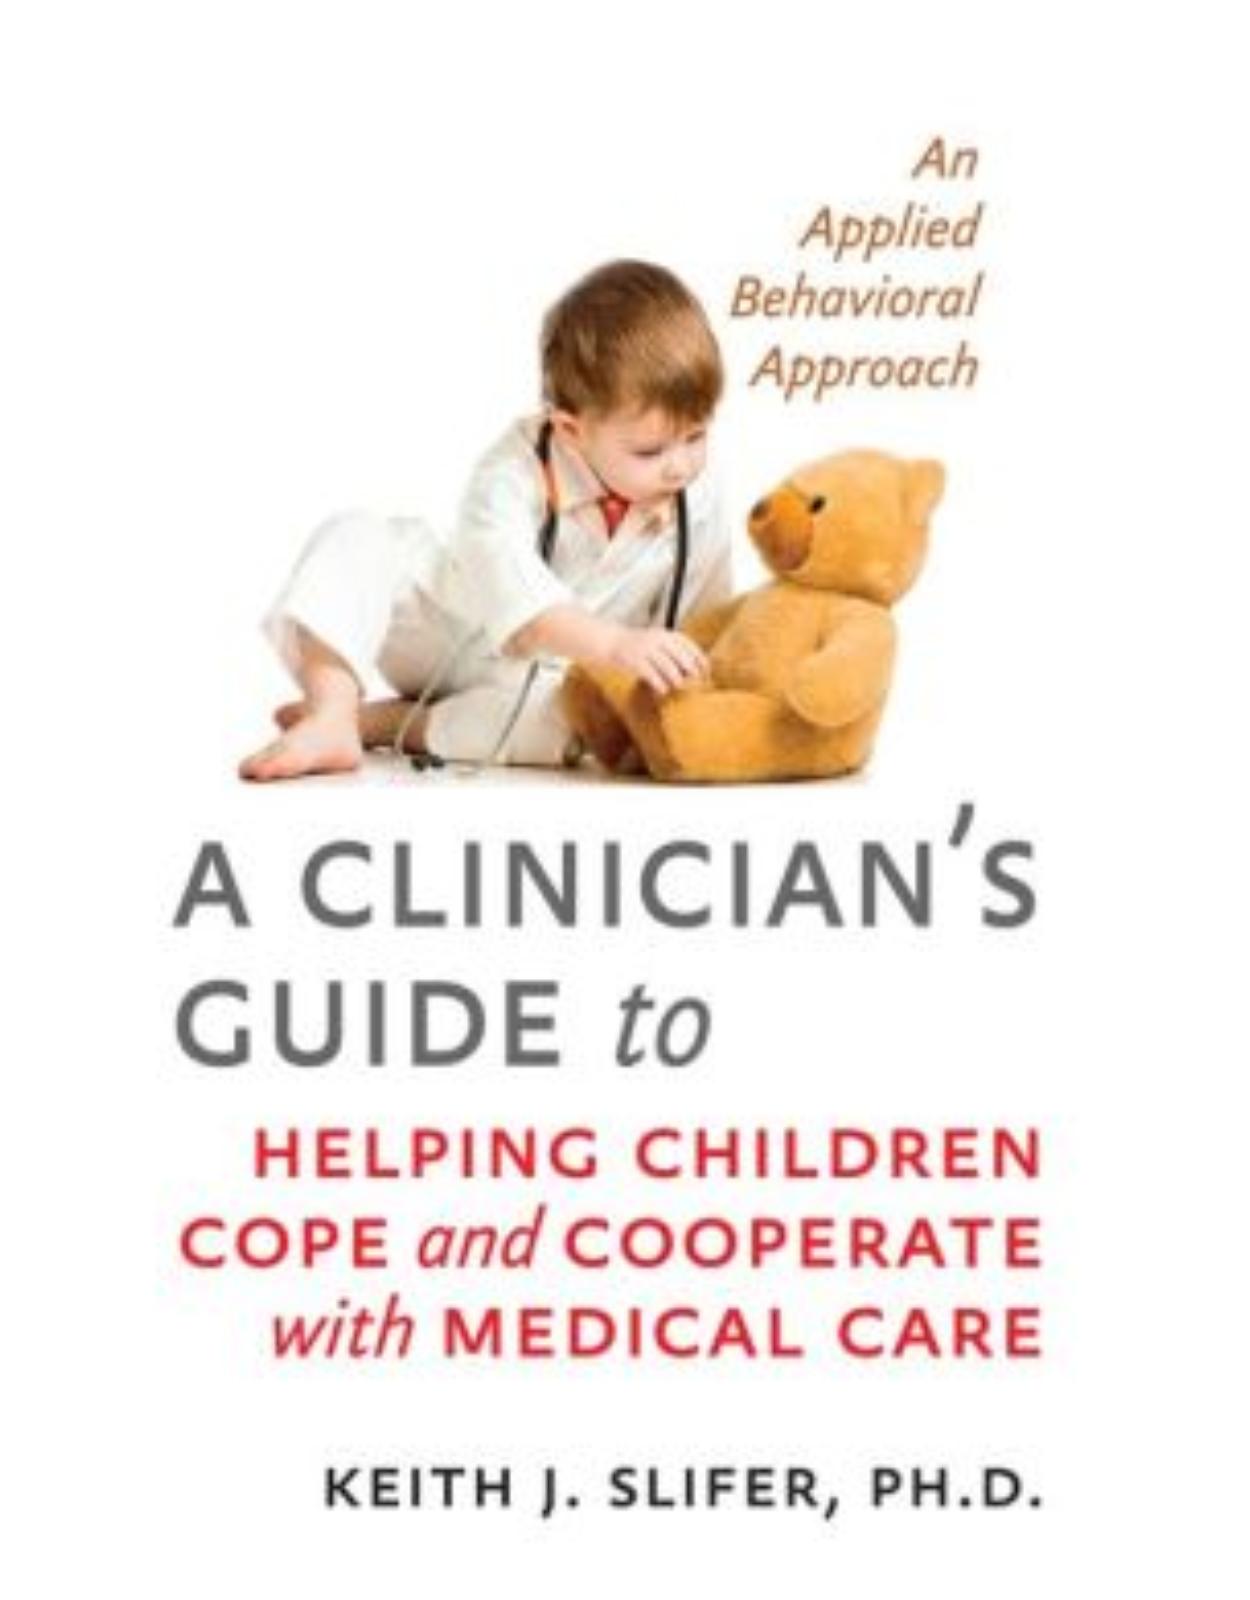 Clinician's Guide to Helping Children Cope and Cooperate with Medical Care. An Applied Behavioral Approach